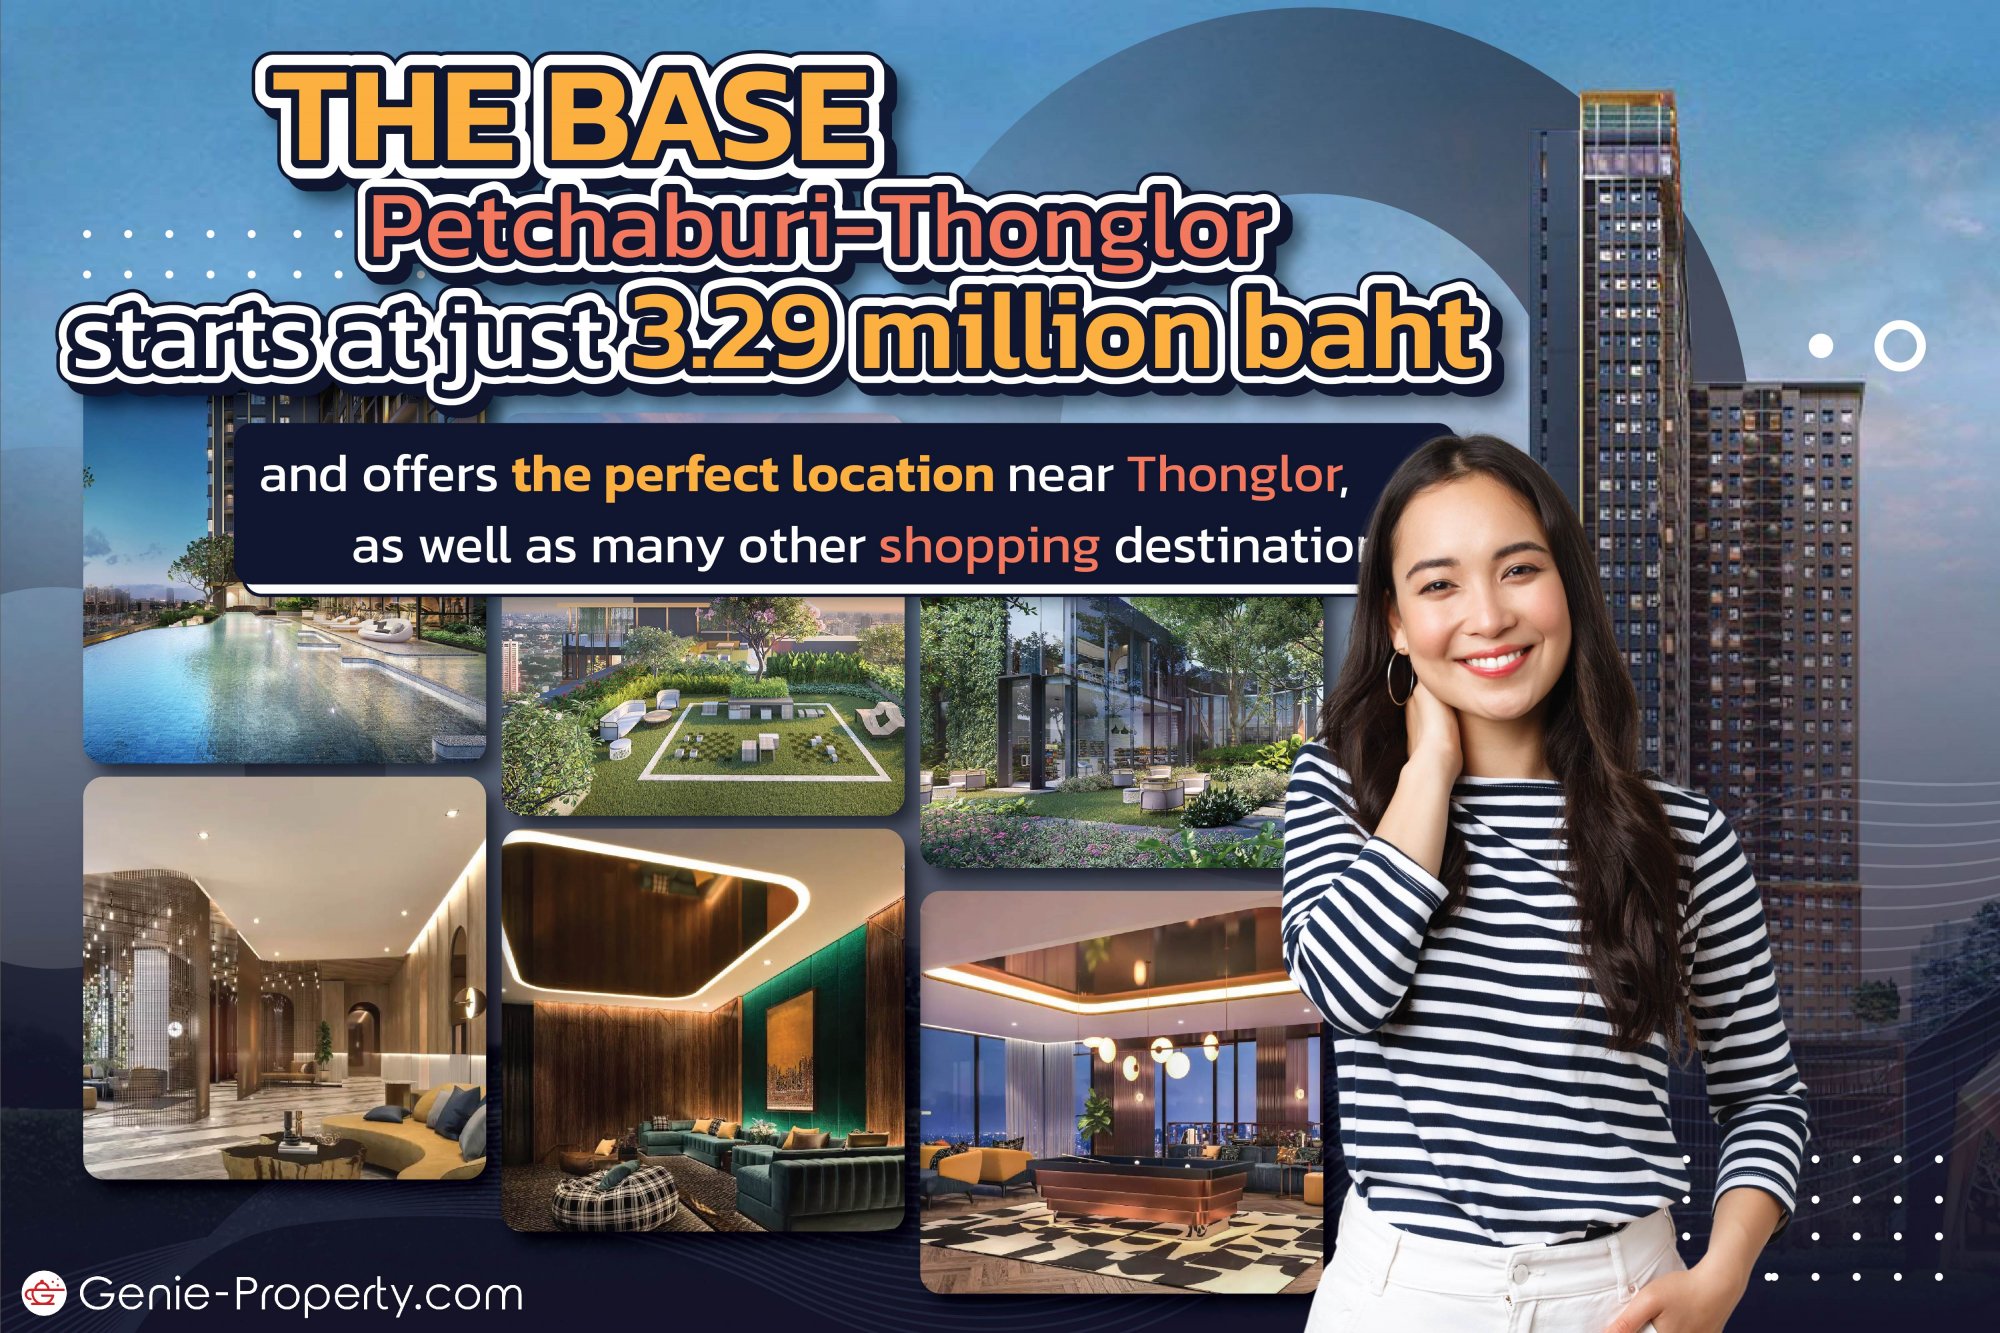 image for he Base Petchaburi-Thonglor starts at just 3.29 million baht and offers the perfect location near Thonglor, as well as many other shopping destinations.